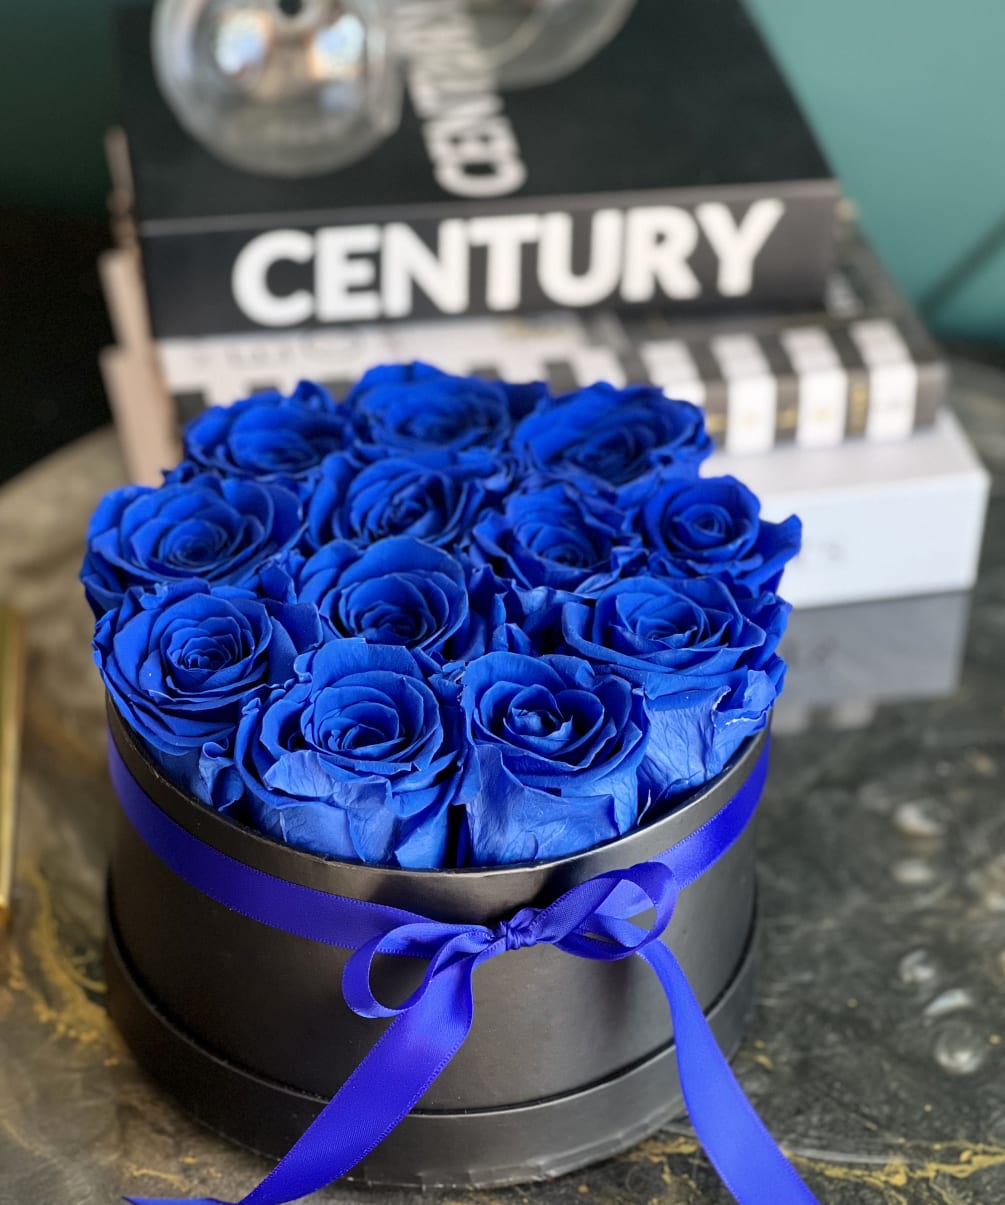 Forever Roses, that last up to 3 years. 
Royal Blue preserved roses